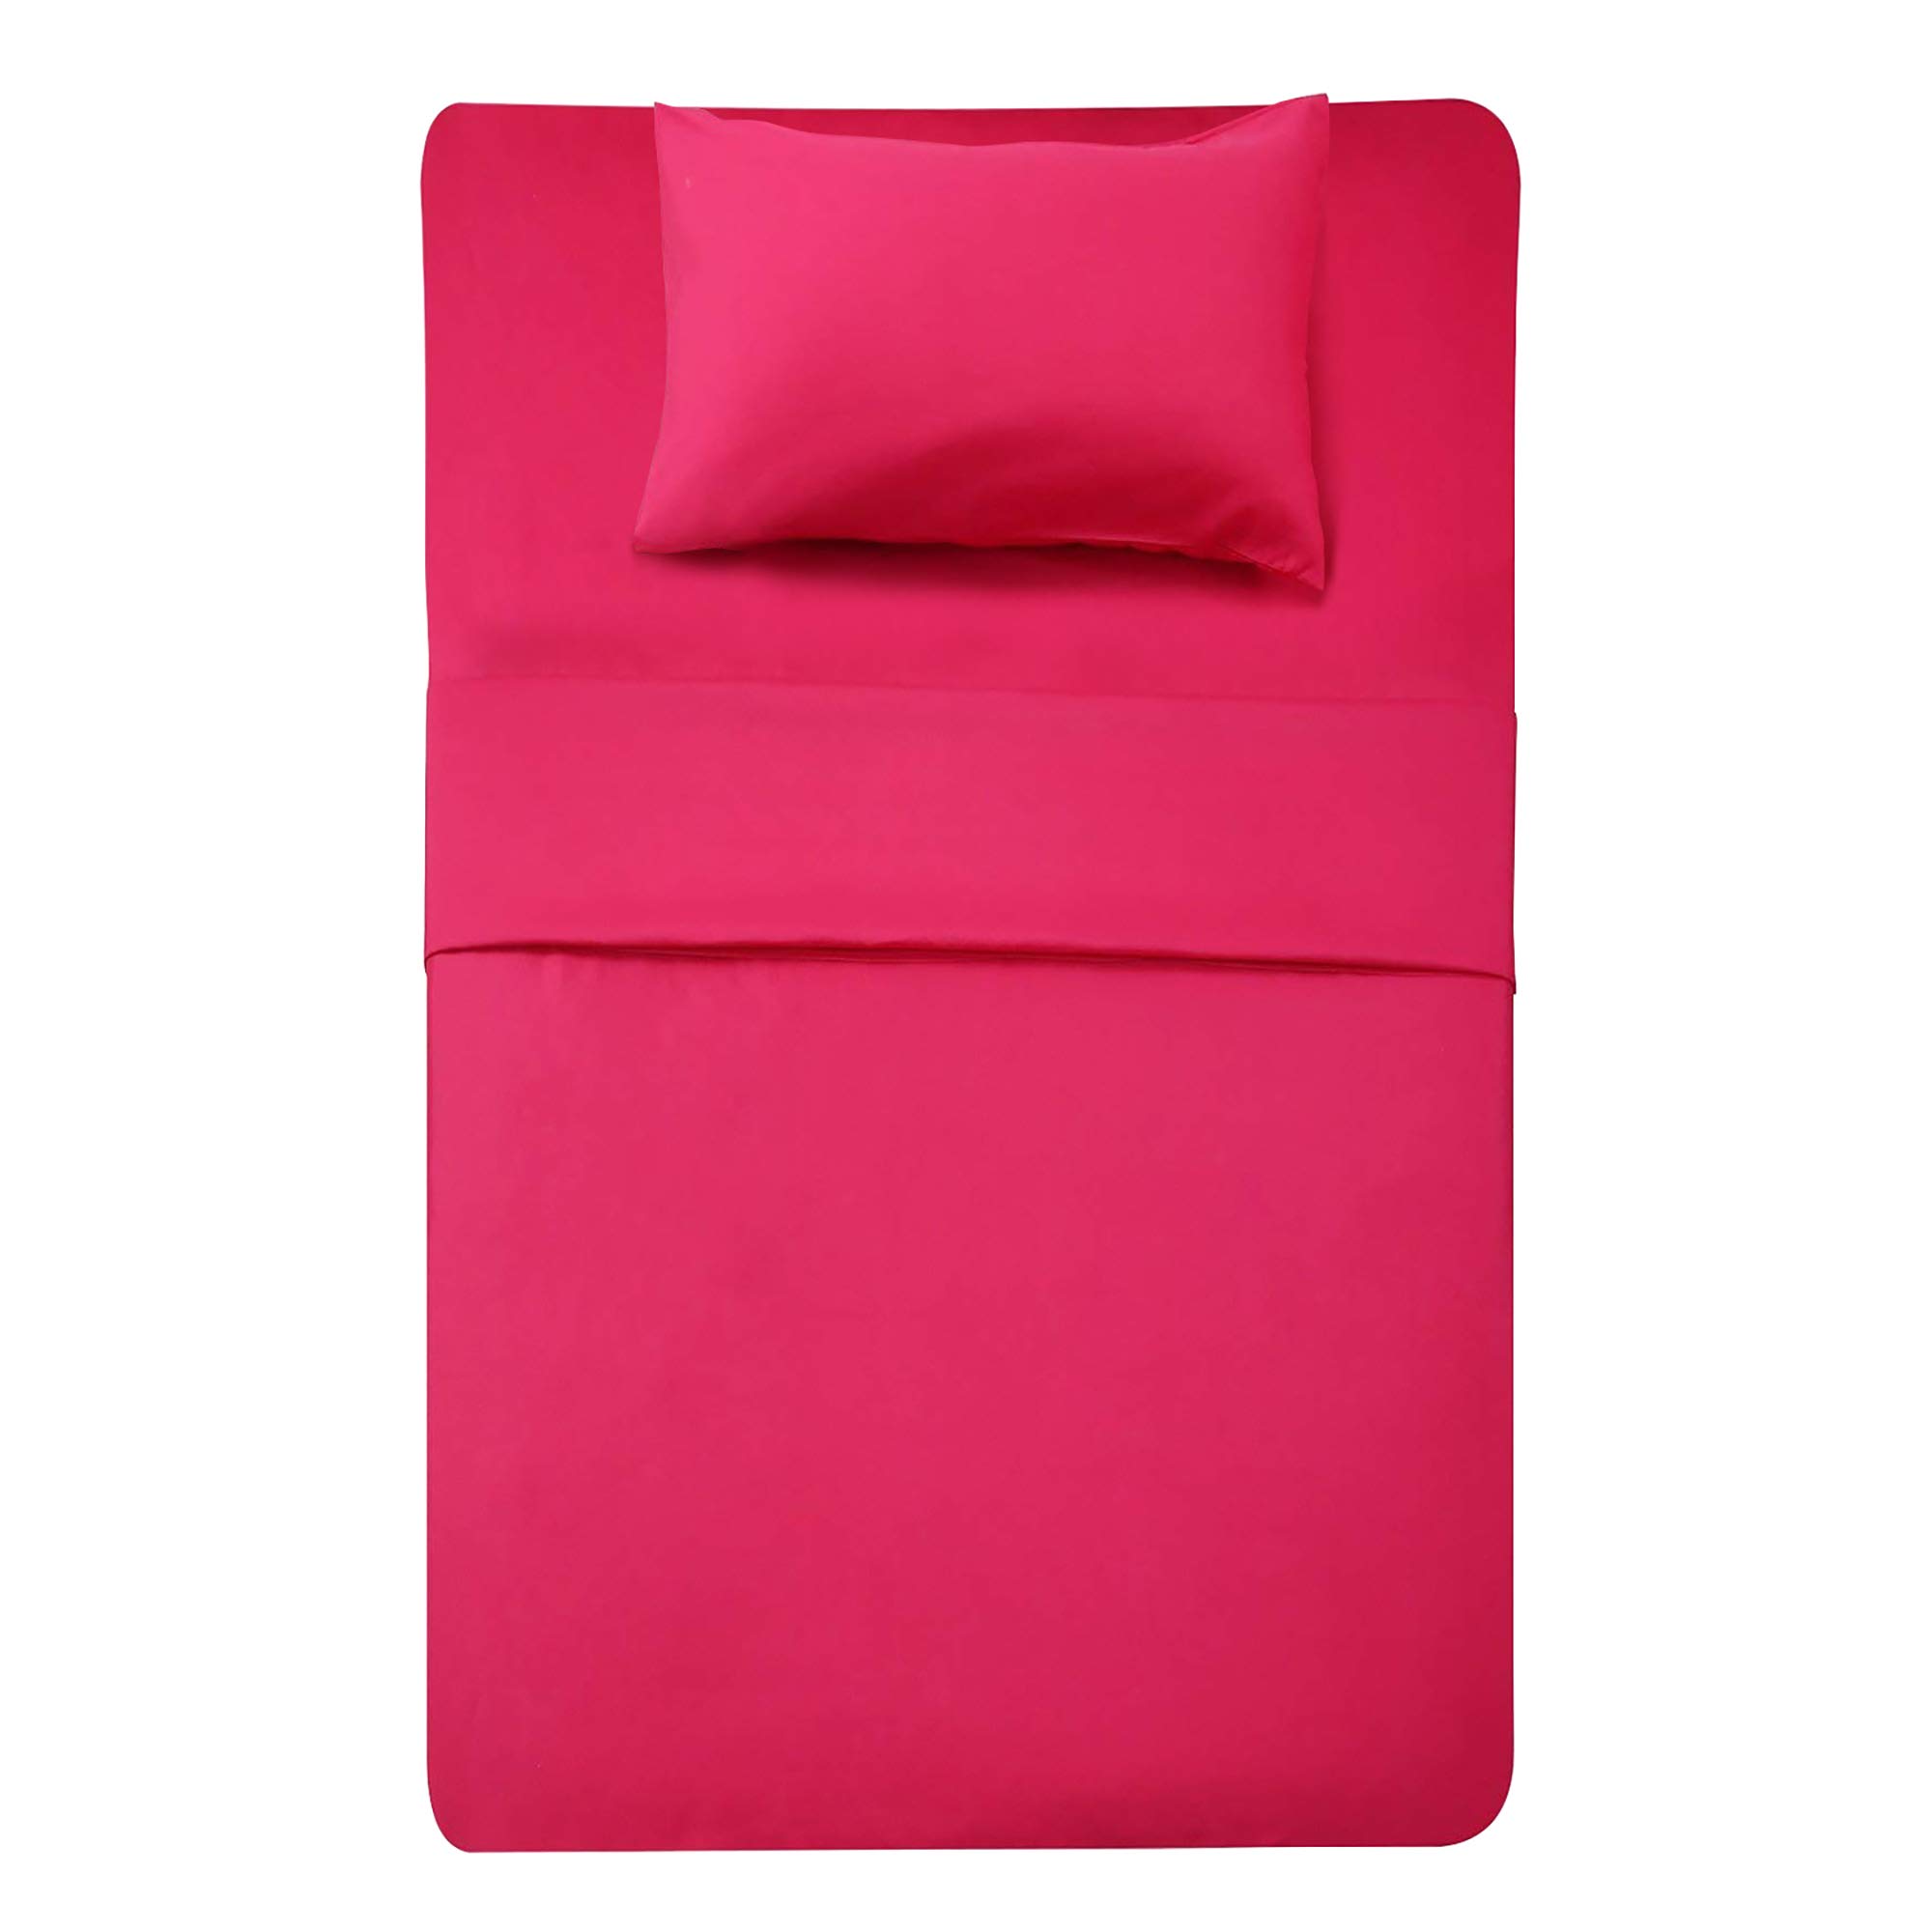 Book Cover Best Season 3 Piece Bed Sheet Set (Twin,Hot Pink) 1 Flat Sheet,1 Fitted Sheet and 1 Pillow Cases,100% Super Soft Brushed Microfiber 1800 Luxury Bedding,Deep Pockets &Wrinkle,Fade Resistant Hot Pink Twin